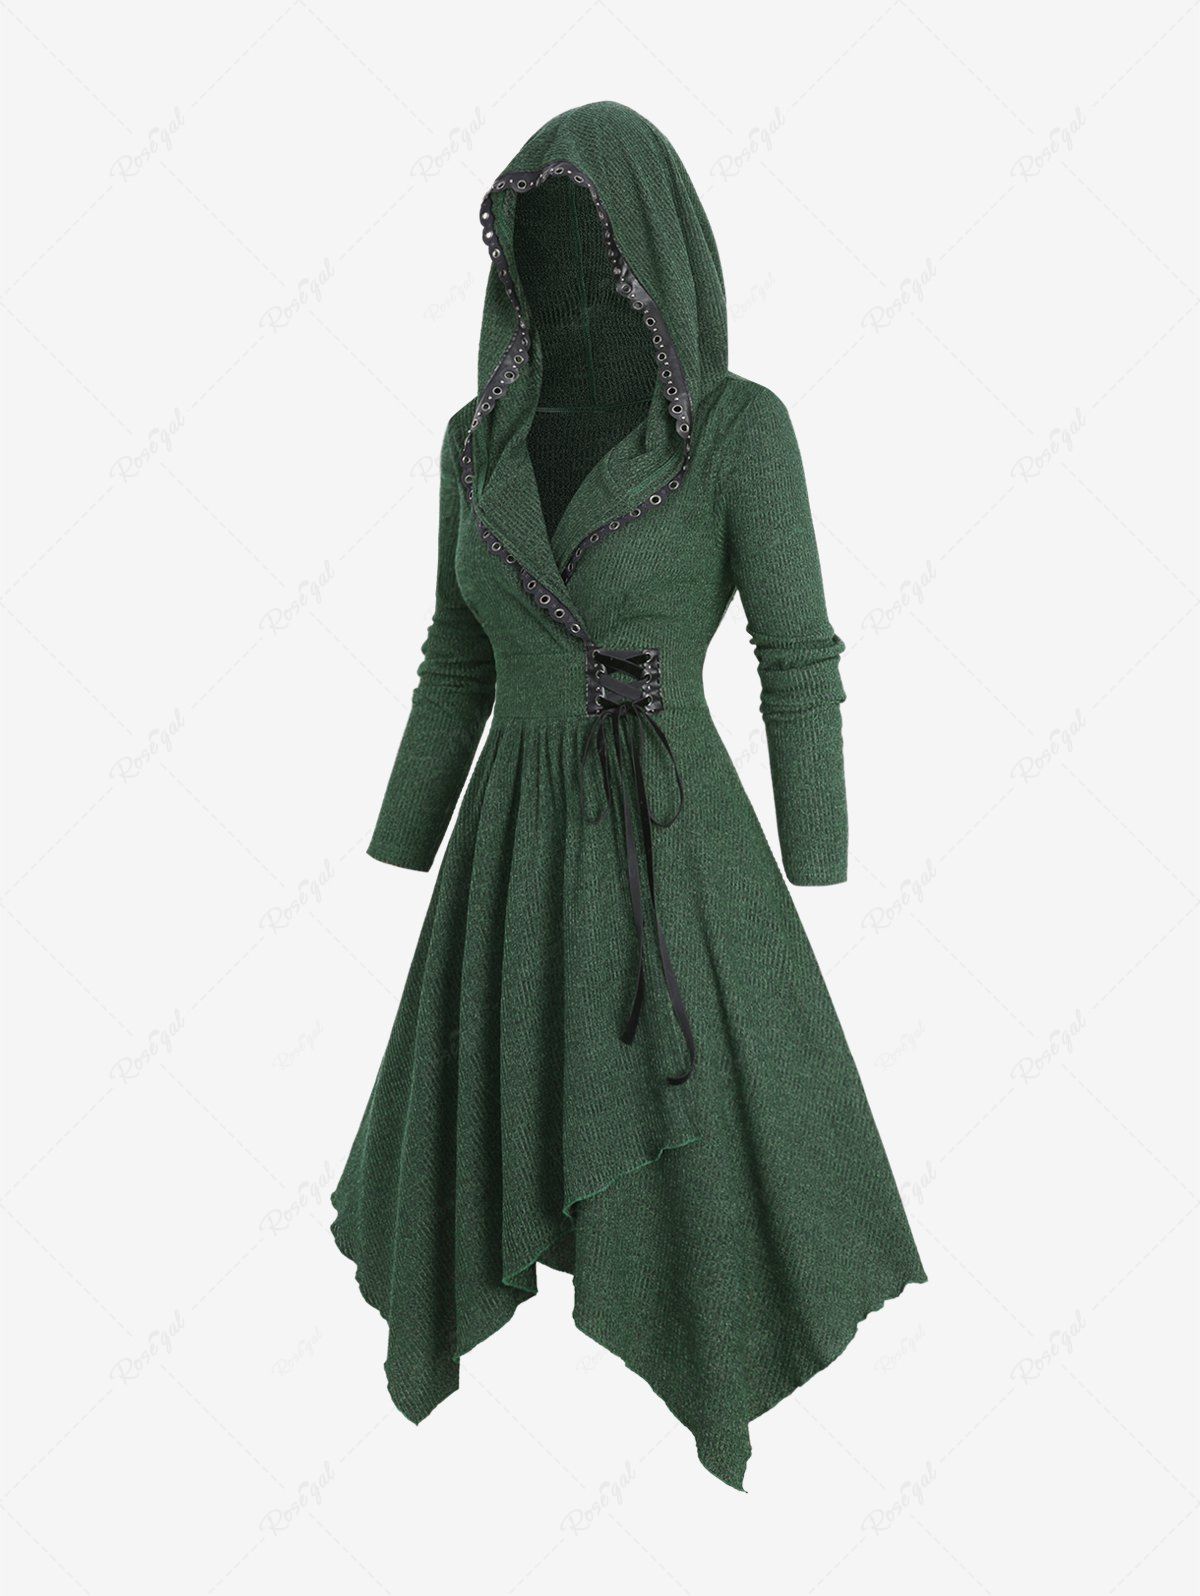 Trendy Plus Size Lace Up Grommets Ruffles Surplice Asymmetrical Textured Hooded Sweater Dress  